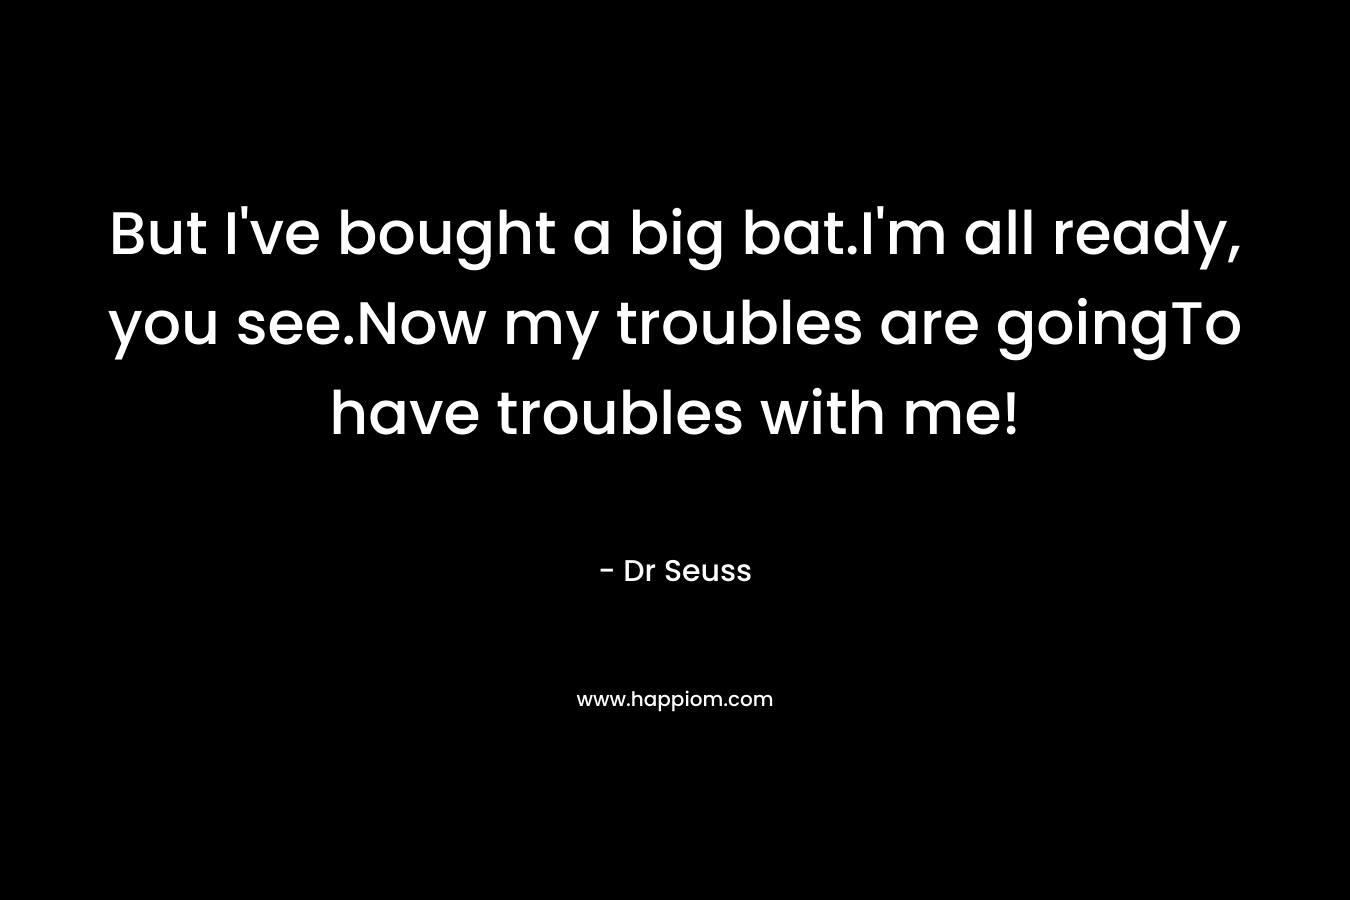 But I've bought a big bat.I'm all ready, you see.Now my troubles are goingTo have troubles with me!